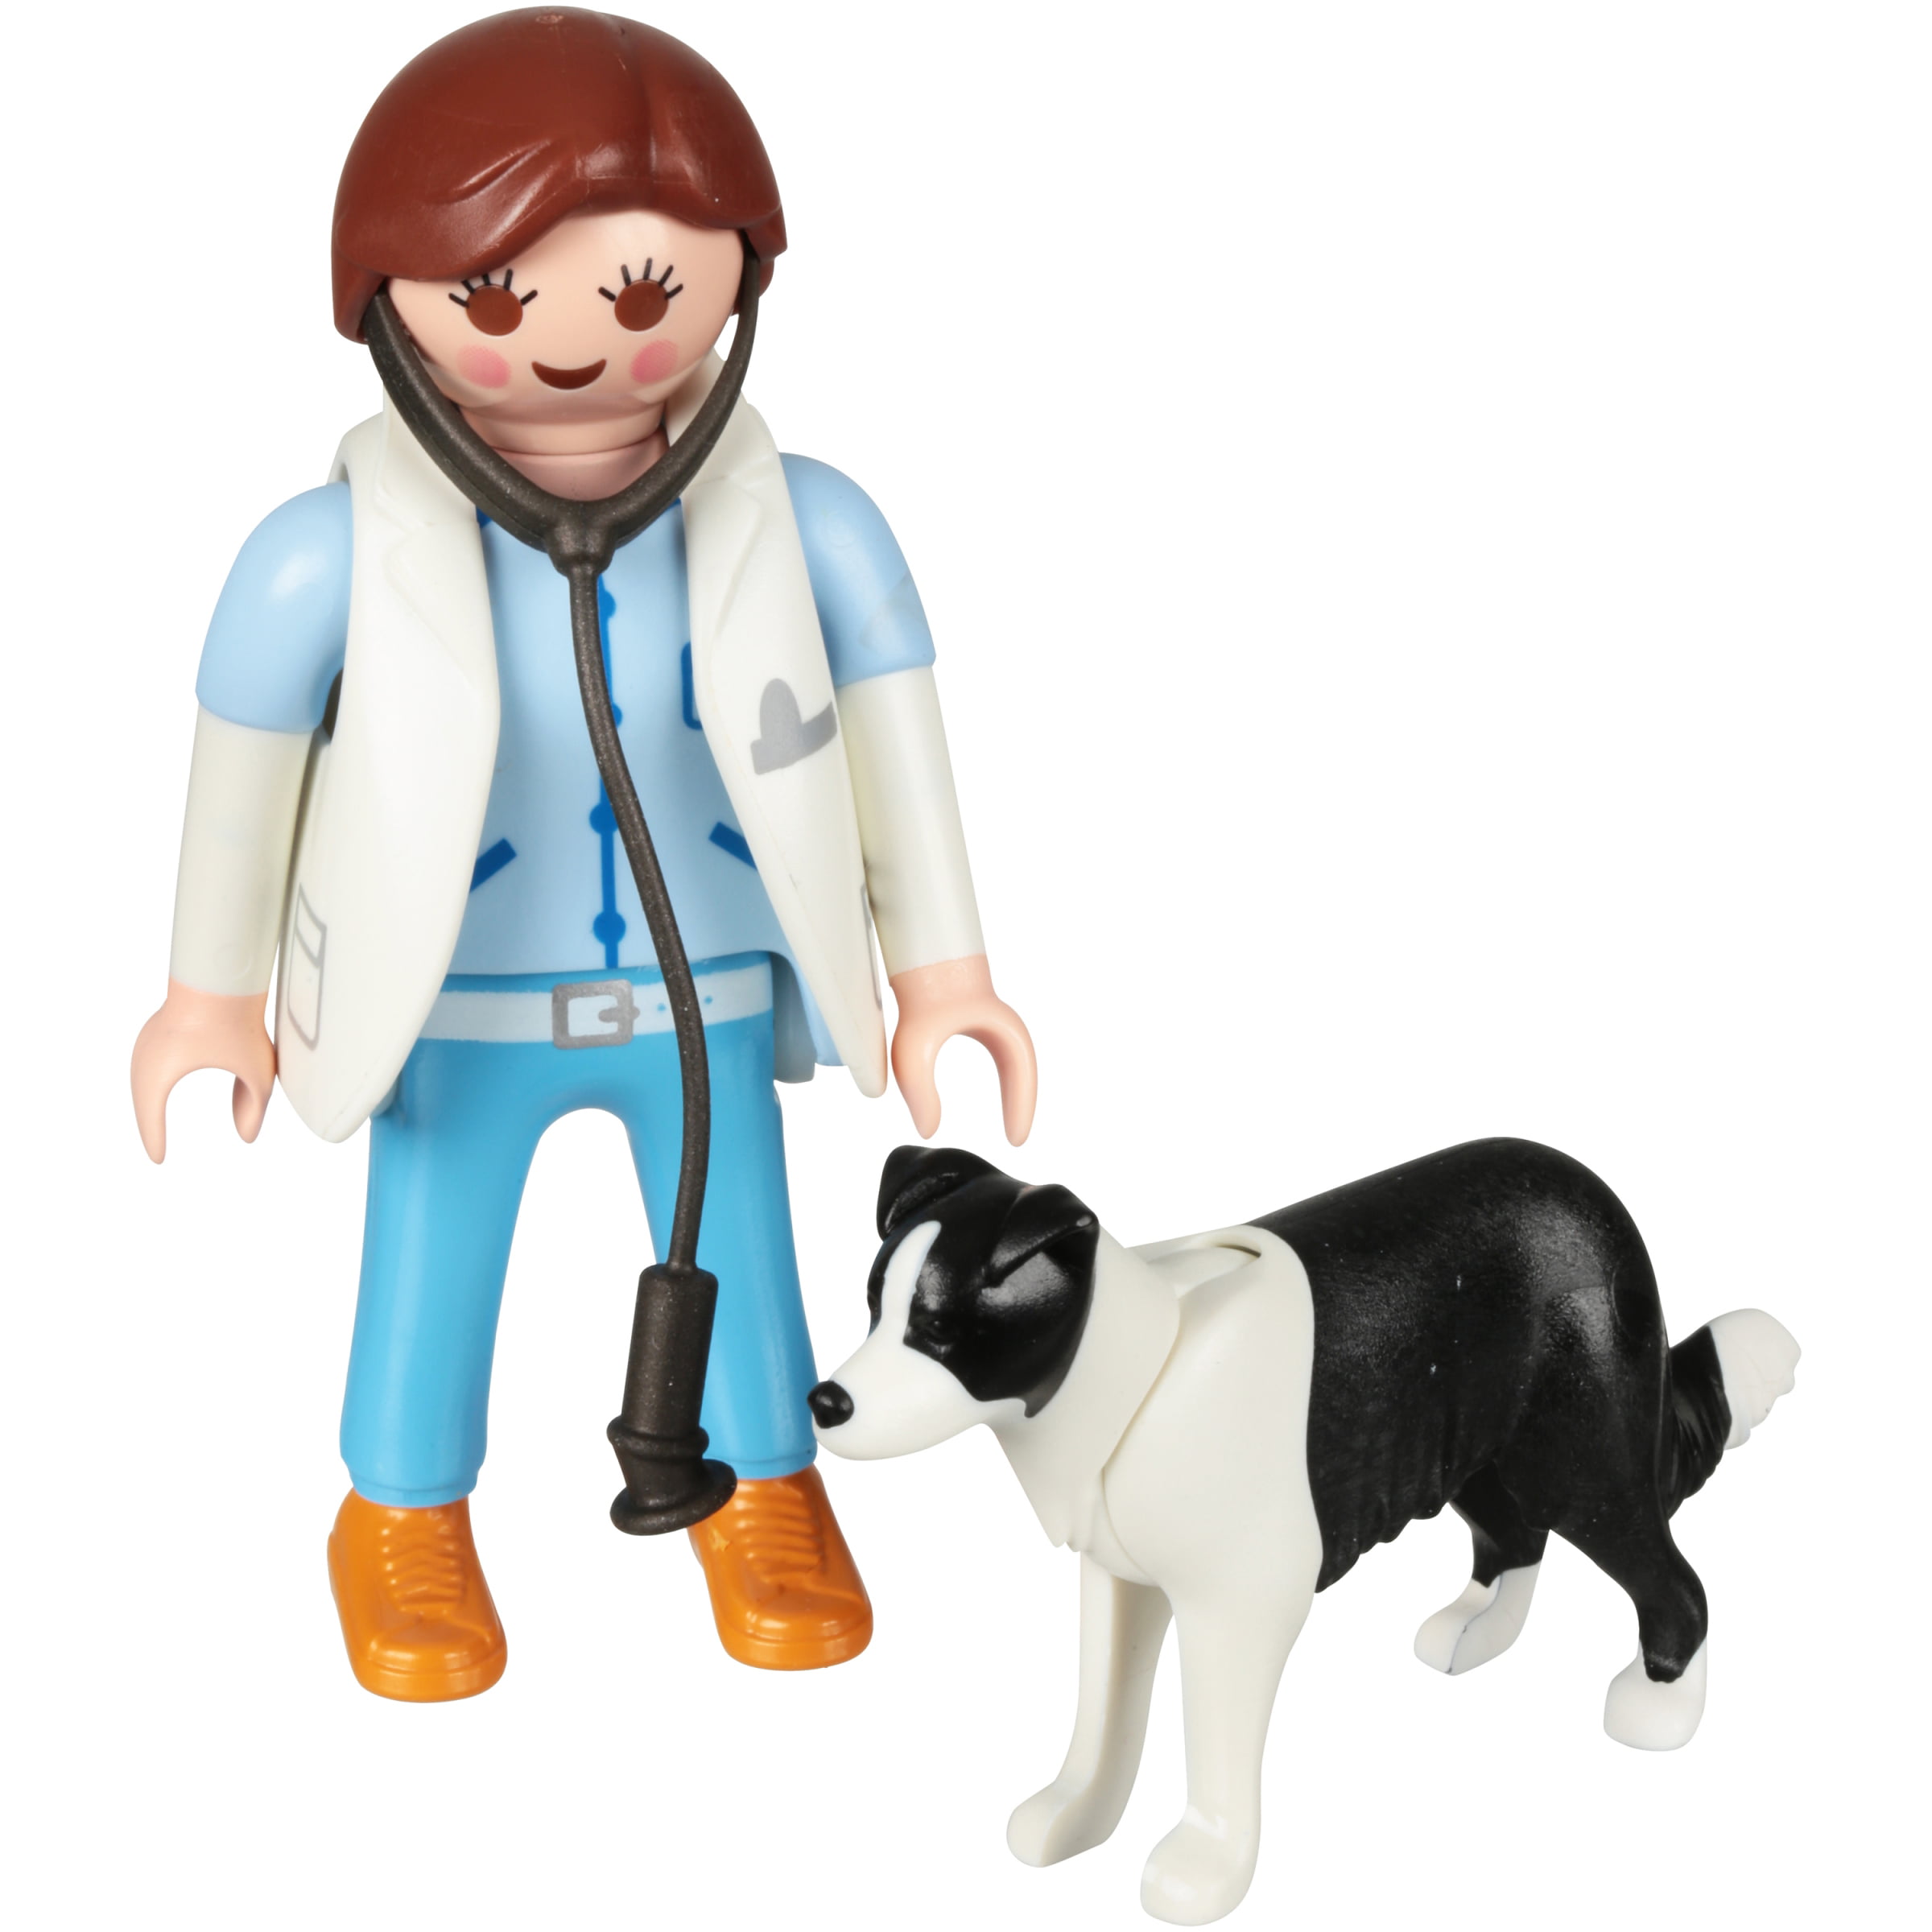 Playmobil Vet Visit Carry Case - A2Z Science & Learning Toy Store